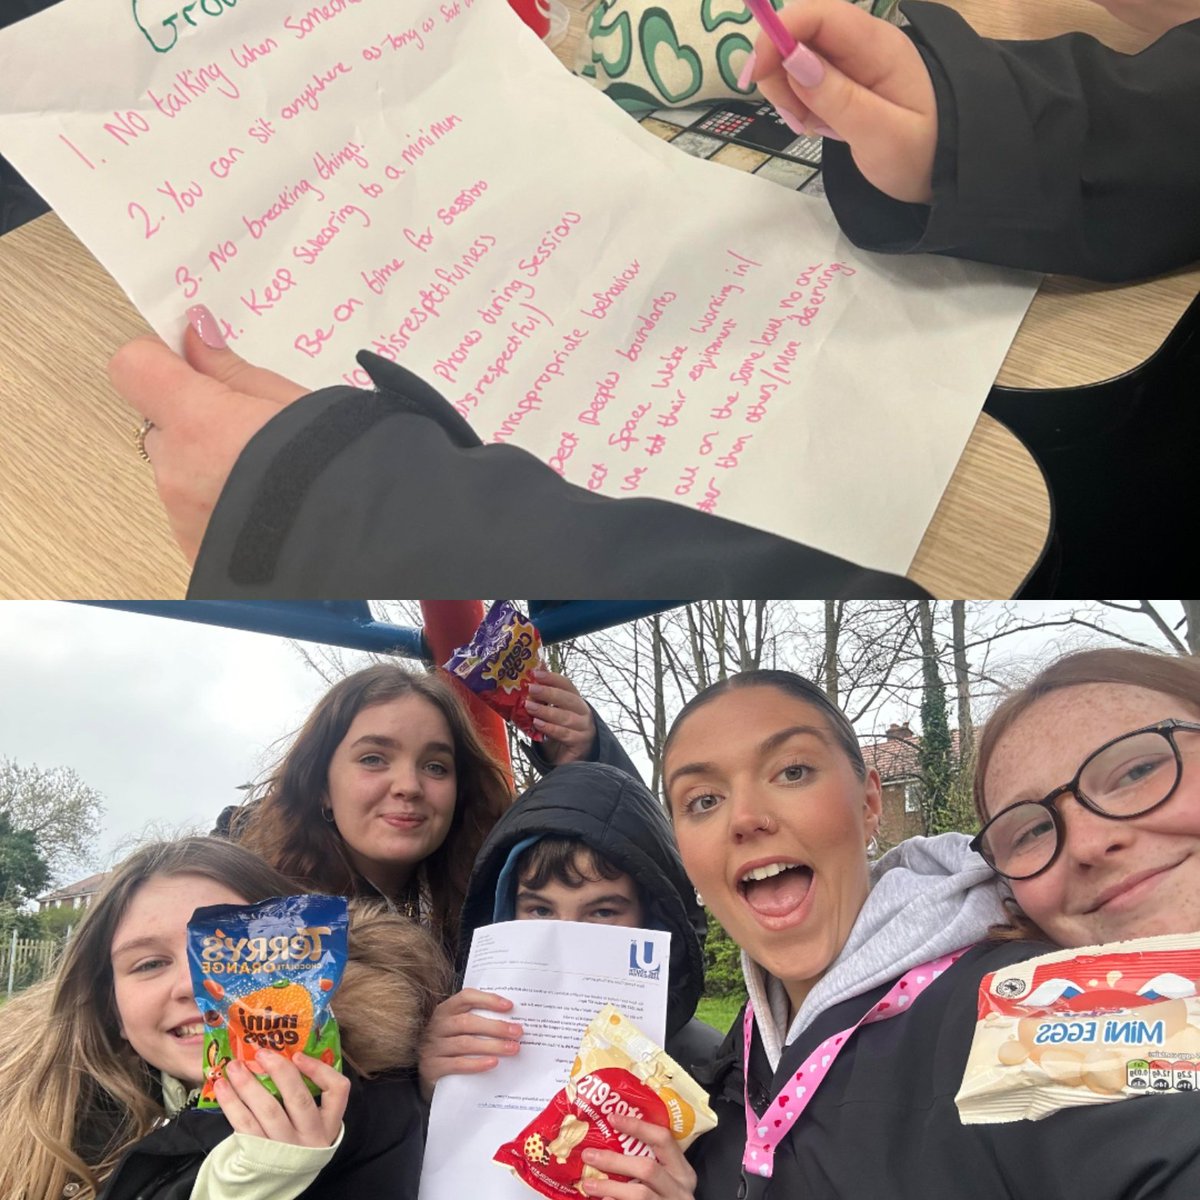 Our Halton Ambassadors have been planning their sessions for after Easter break! They discussed the ground rules to make sure our sessions are safe and fun for everyone and enjoyed some Easter treats!